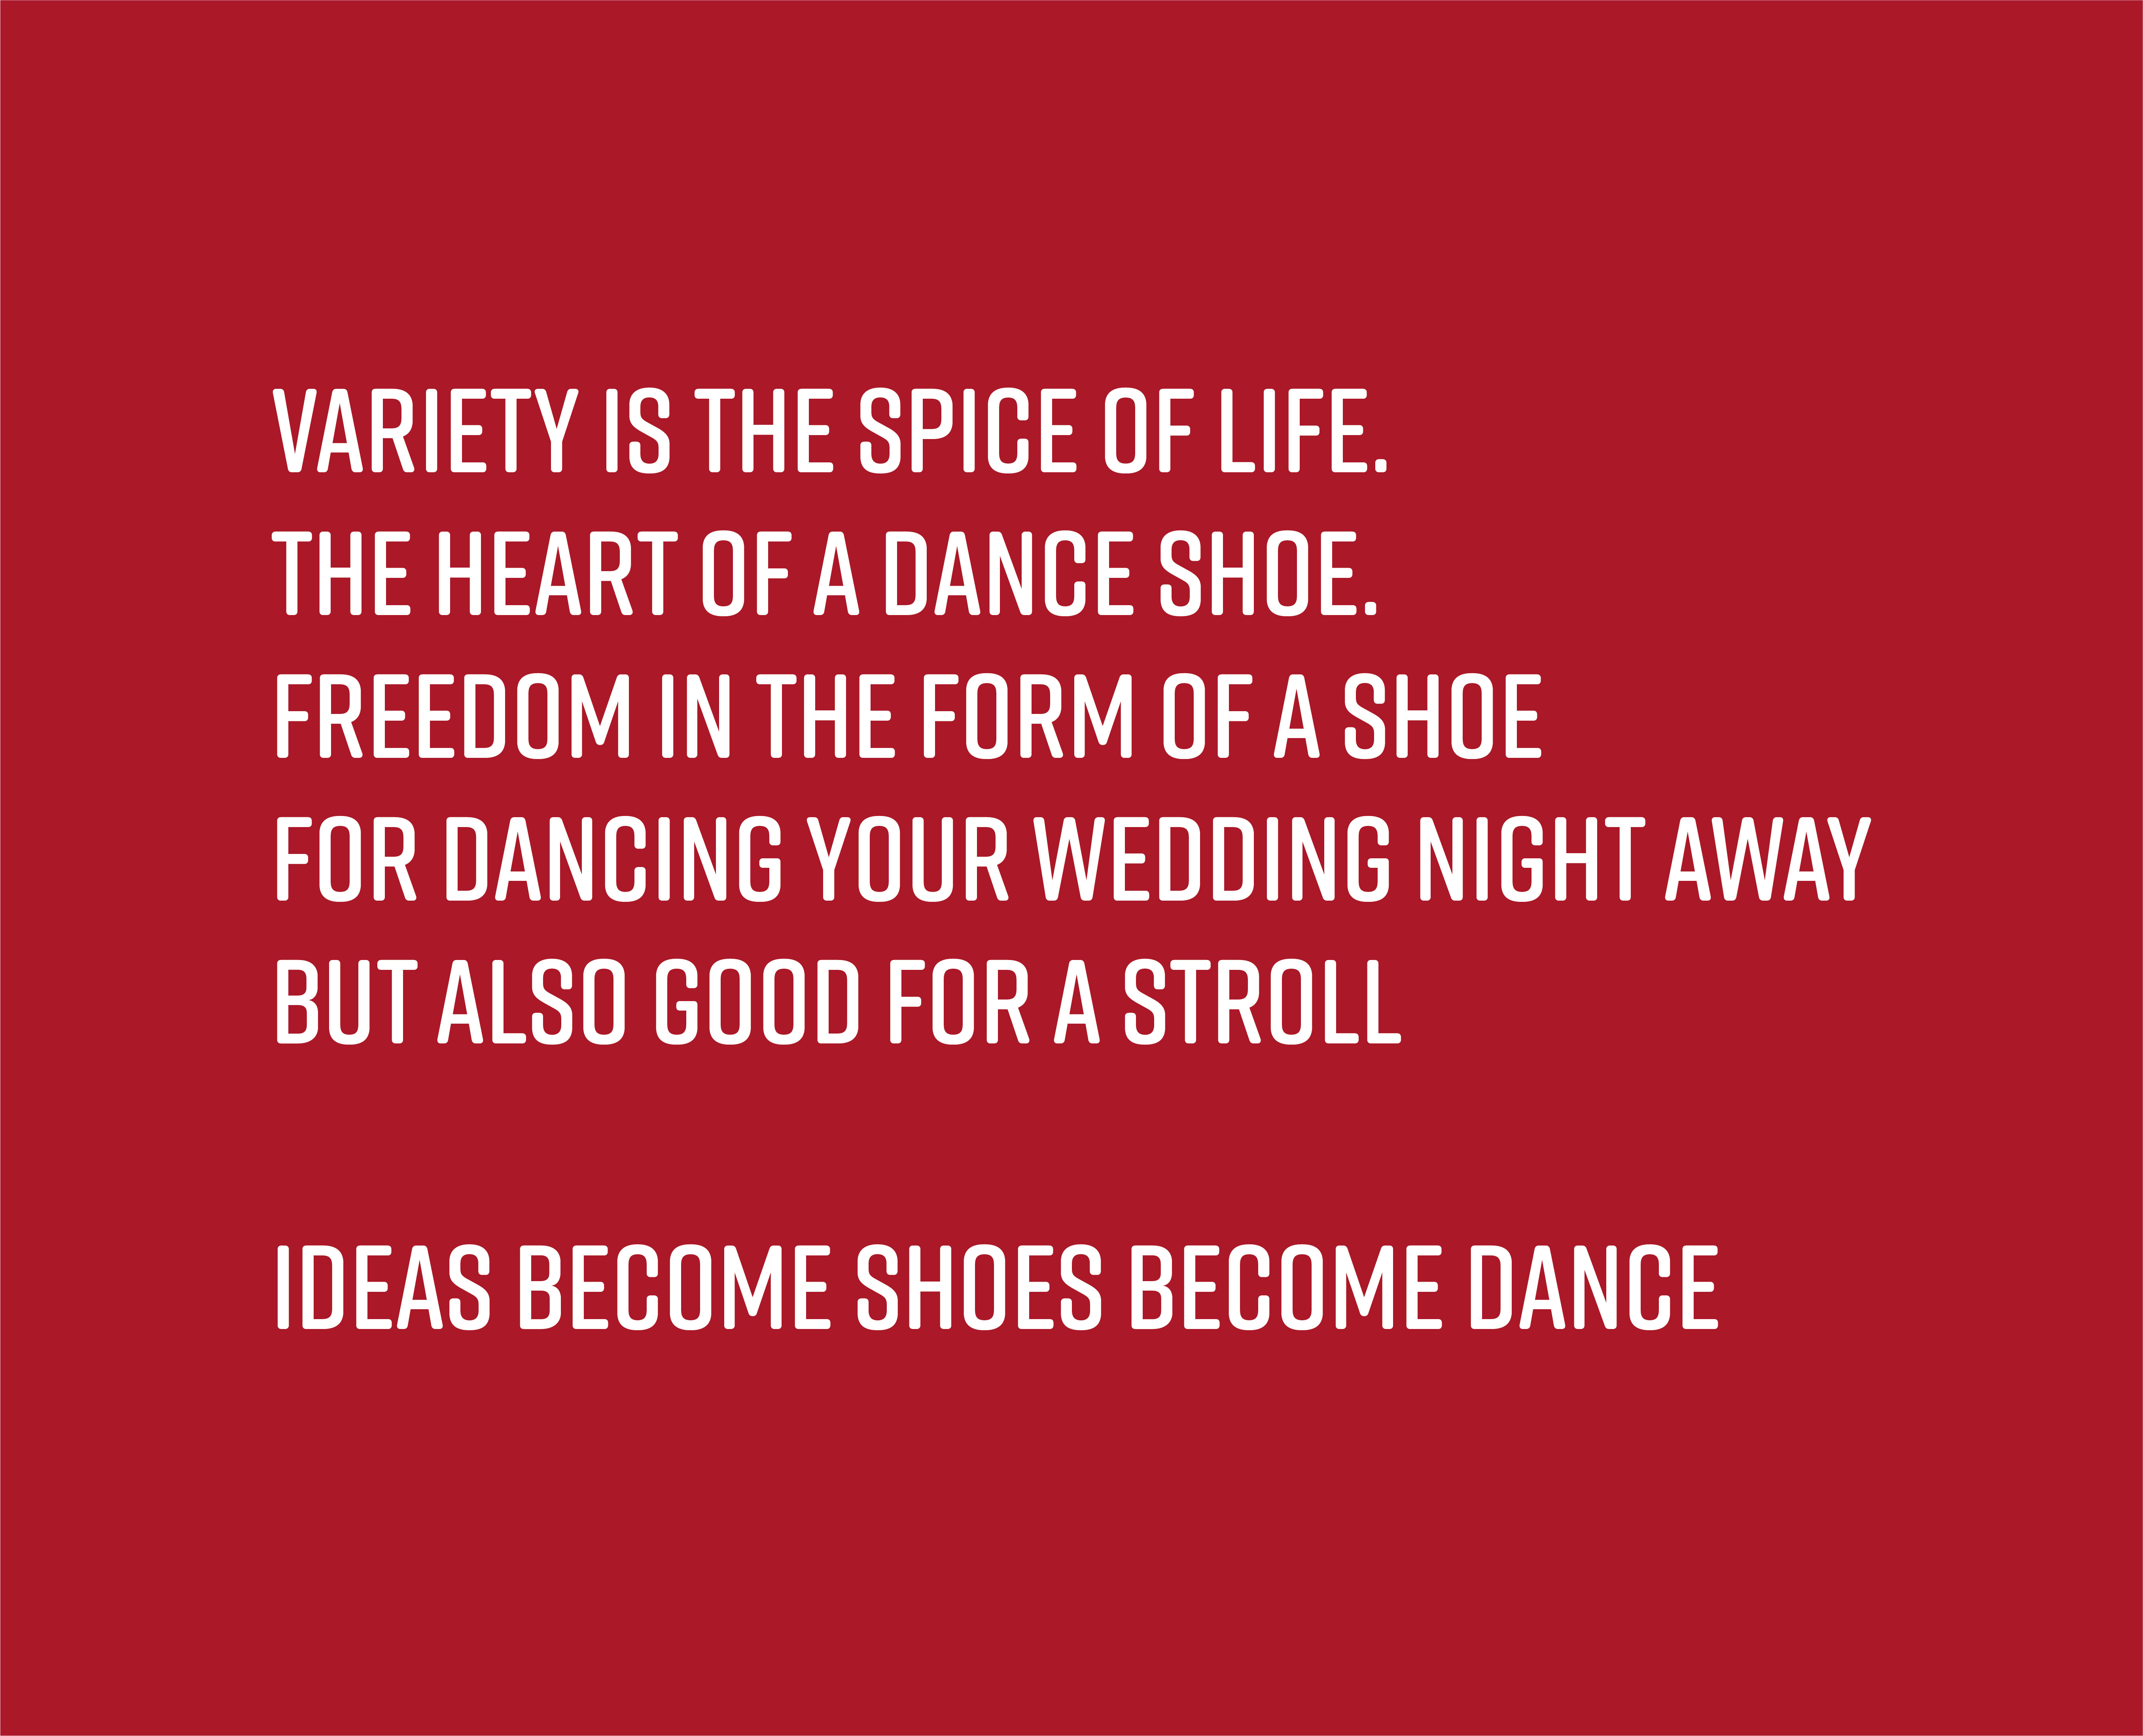 Variety is the spice of life. The heart of a dance shoe. For Dancing your wedding night away. But also good for a stroll. Ideas become shoes become dance.